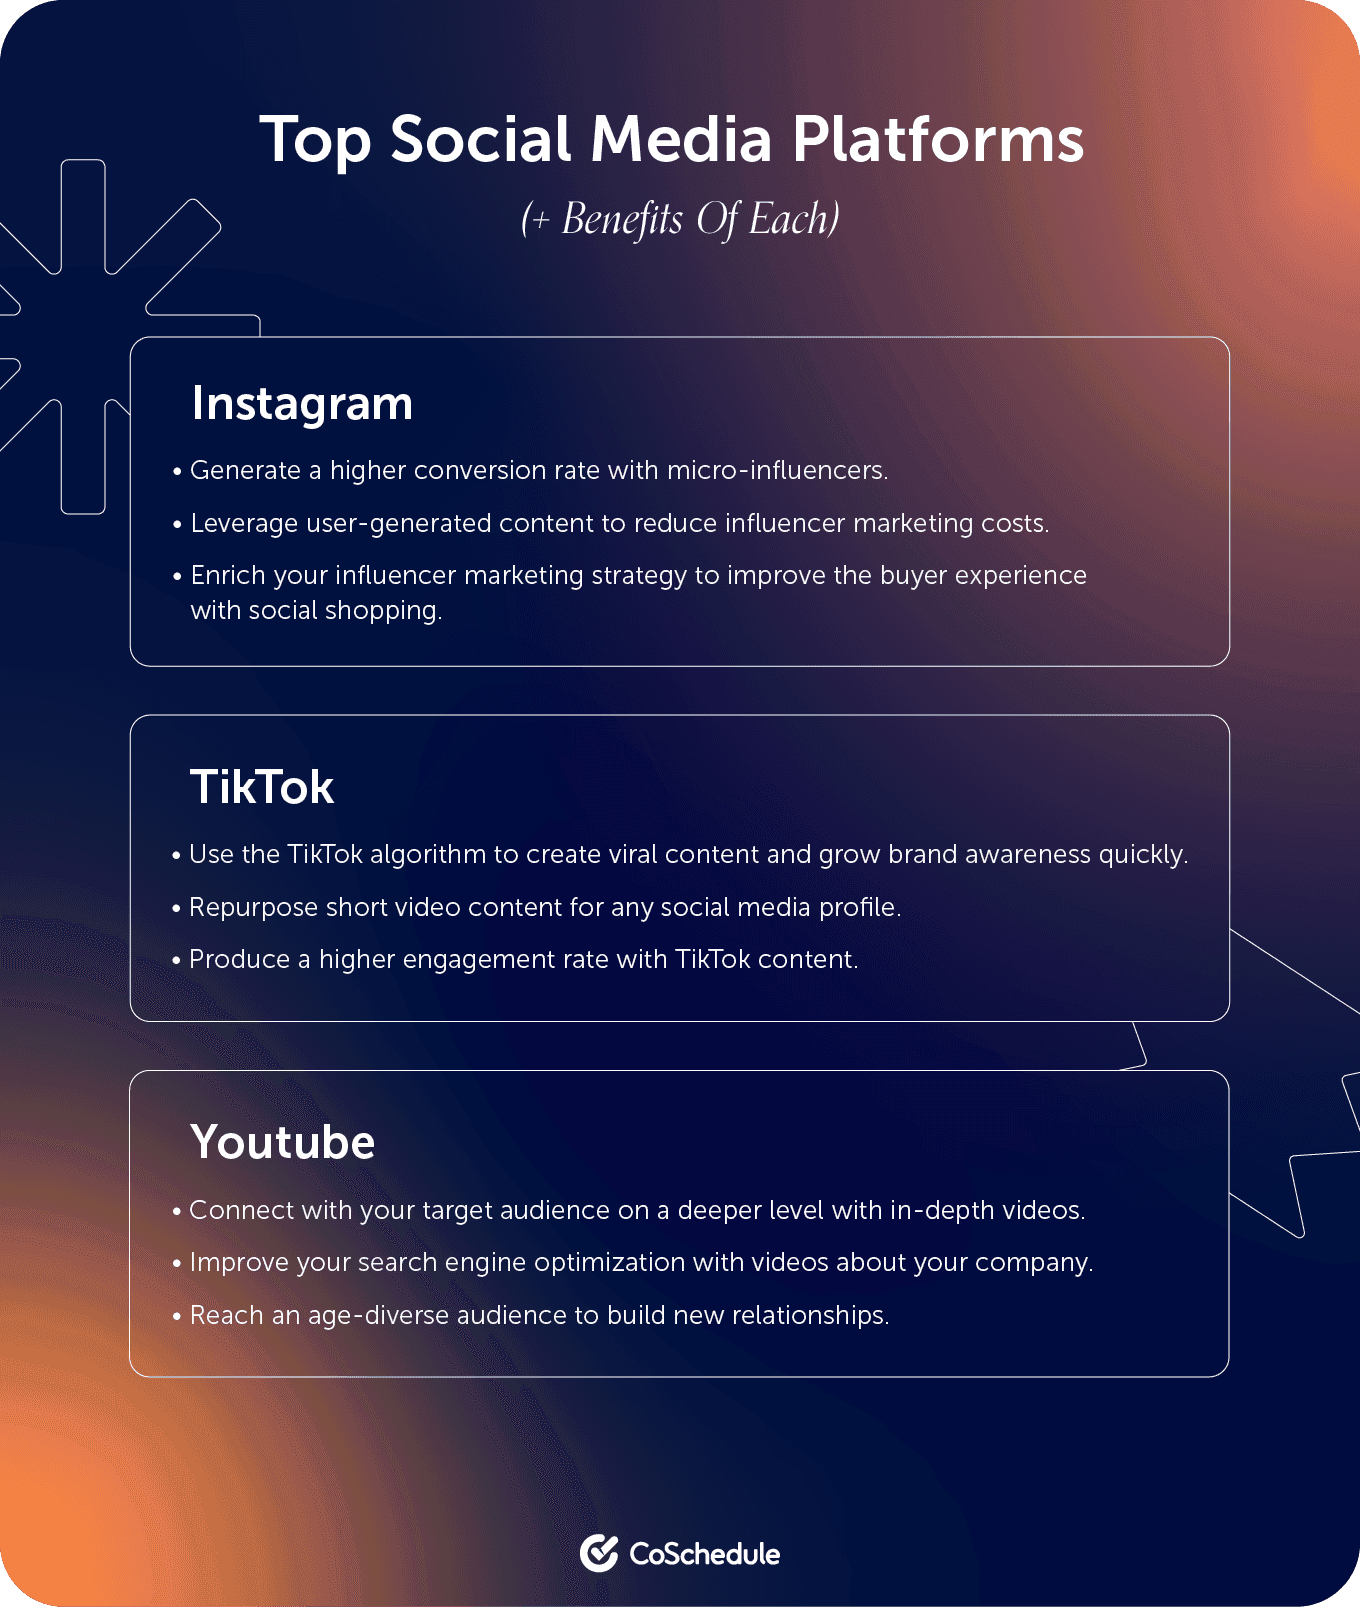 CoSchedule showing the top 3 social media platforms which are Instagram, TikTok, and Youtube with the benefits of each listed under them.